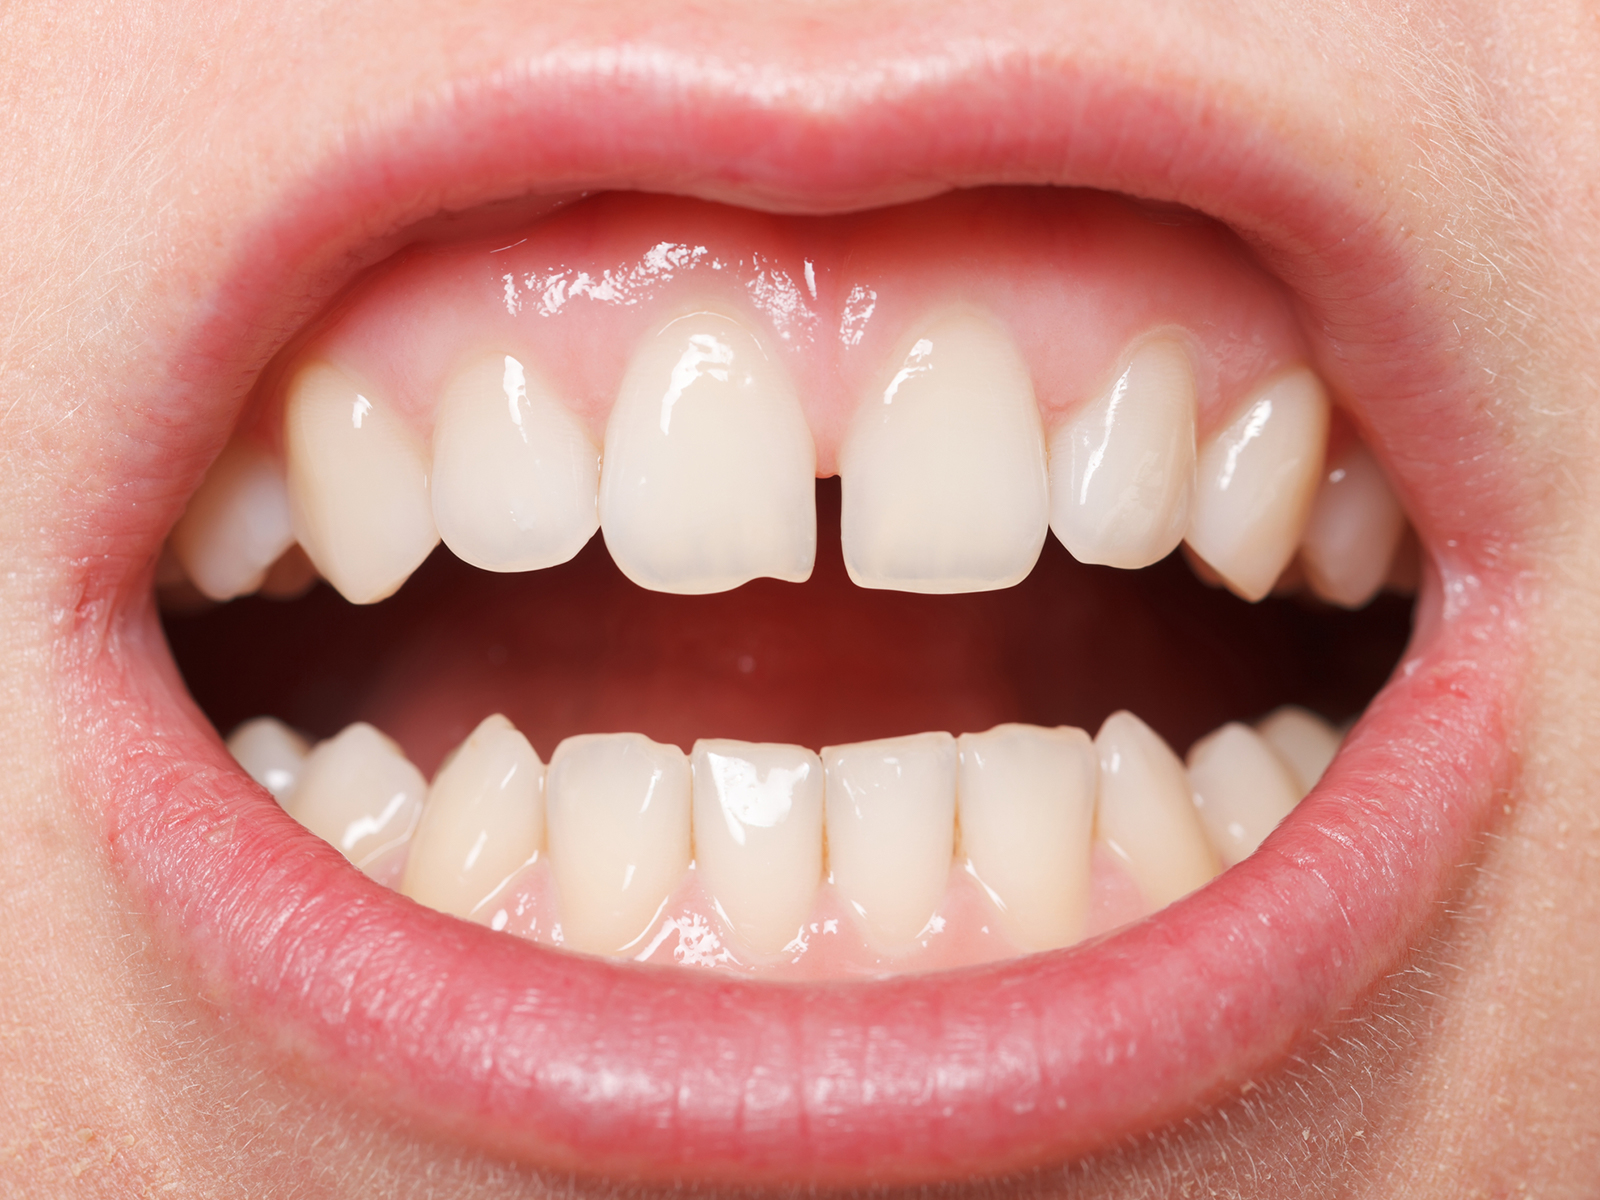 How Does Diastema Affect My Oral Health?